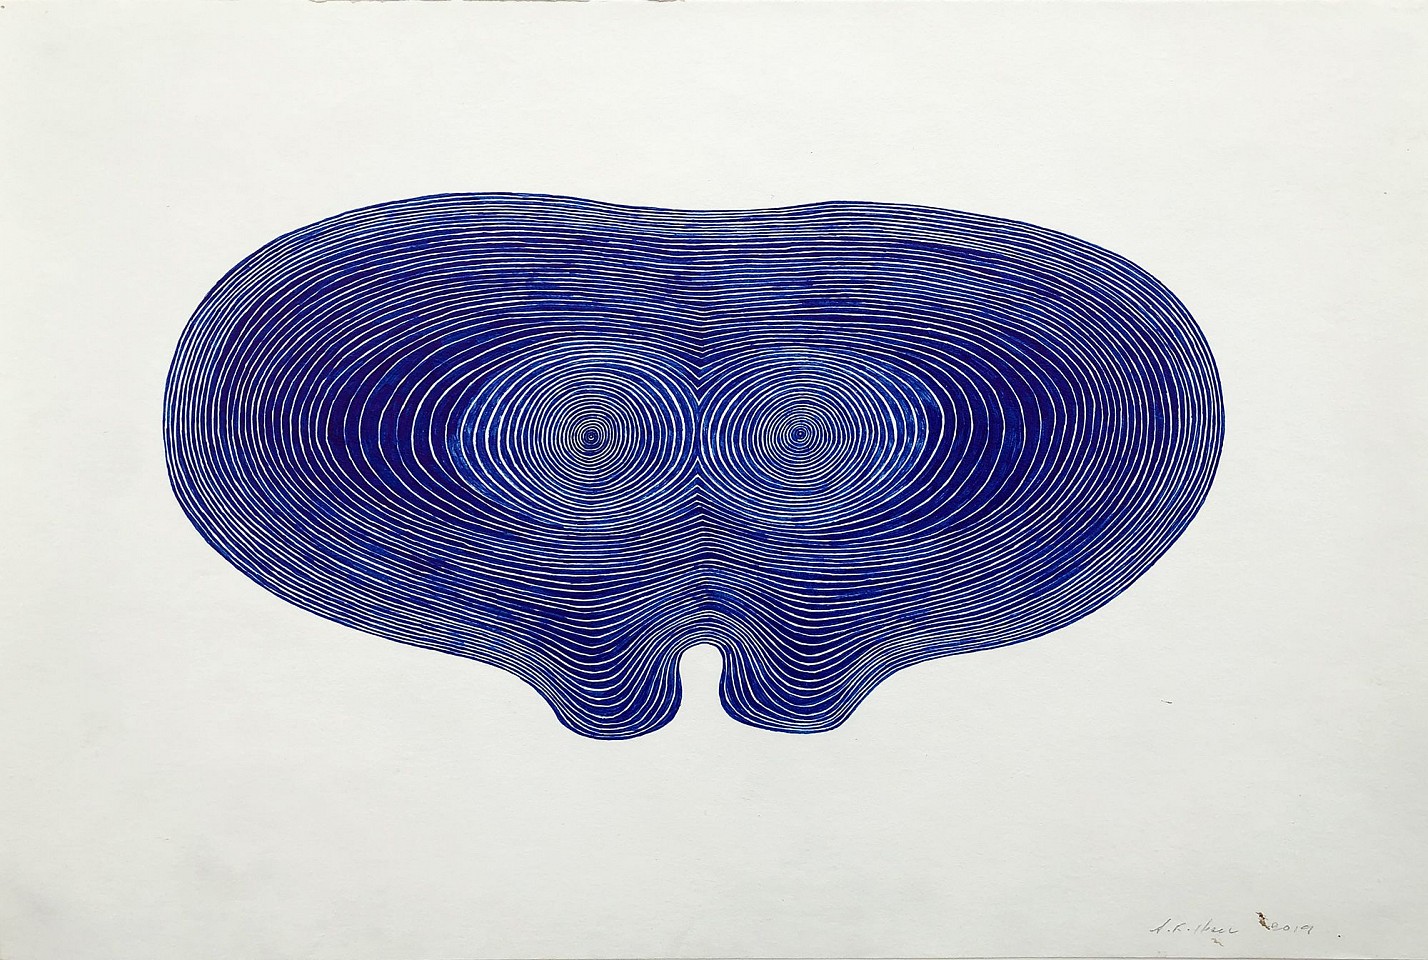 Stewart Helm, Blue-Double Eye, 2019
colored inks on paper, 11.5" x 17.5"
SH-617
Price Upon Request